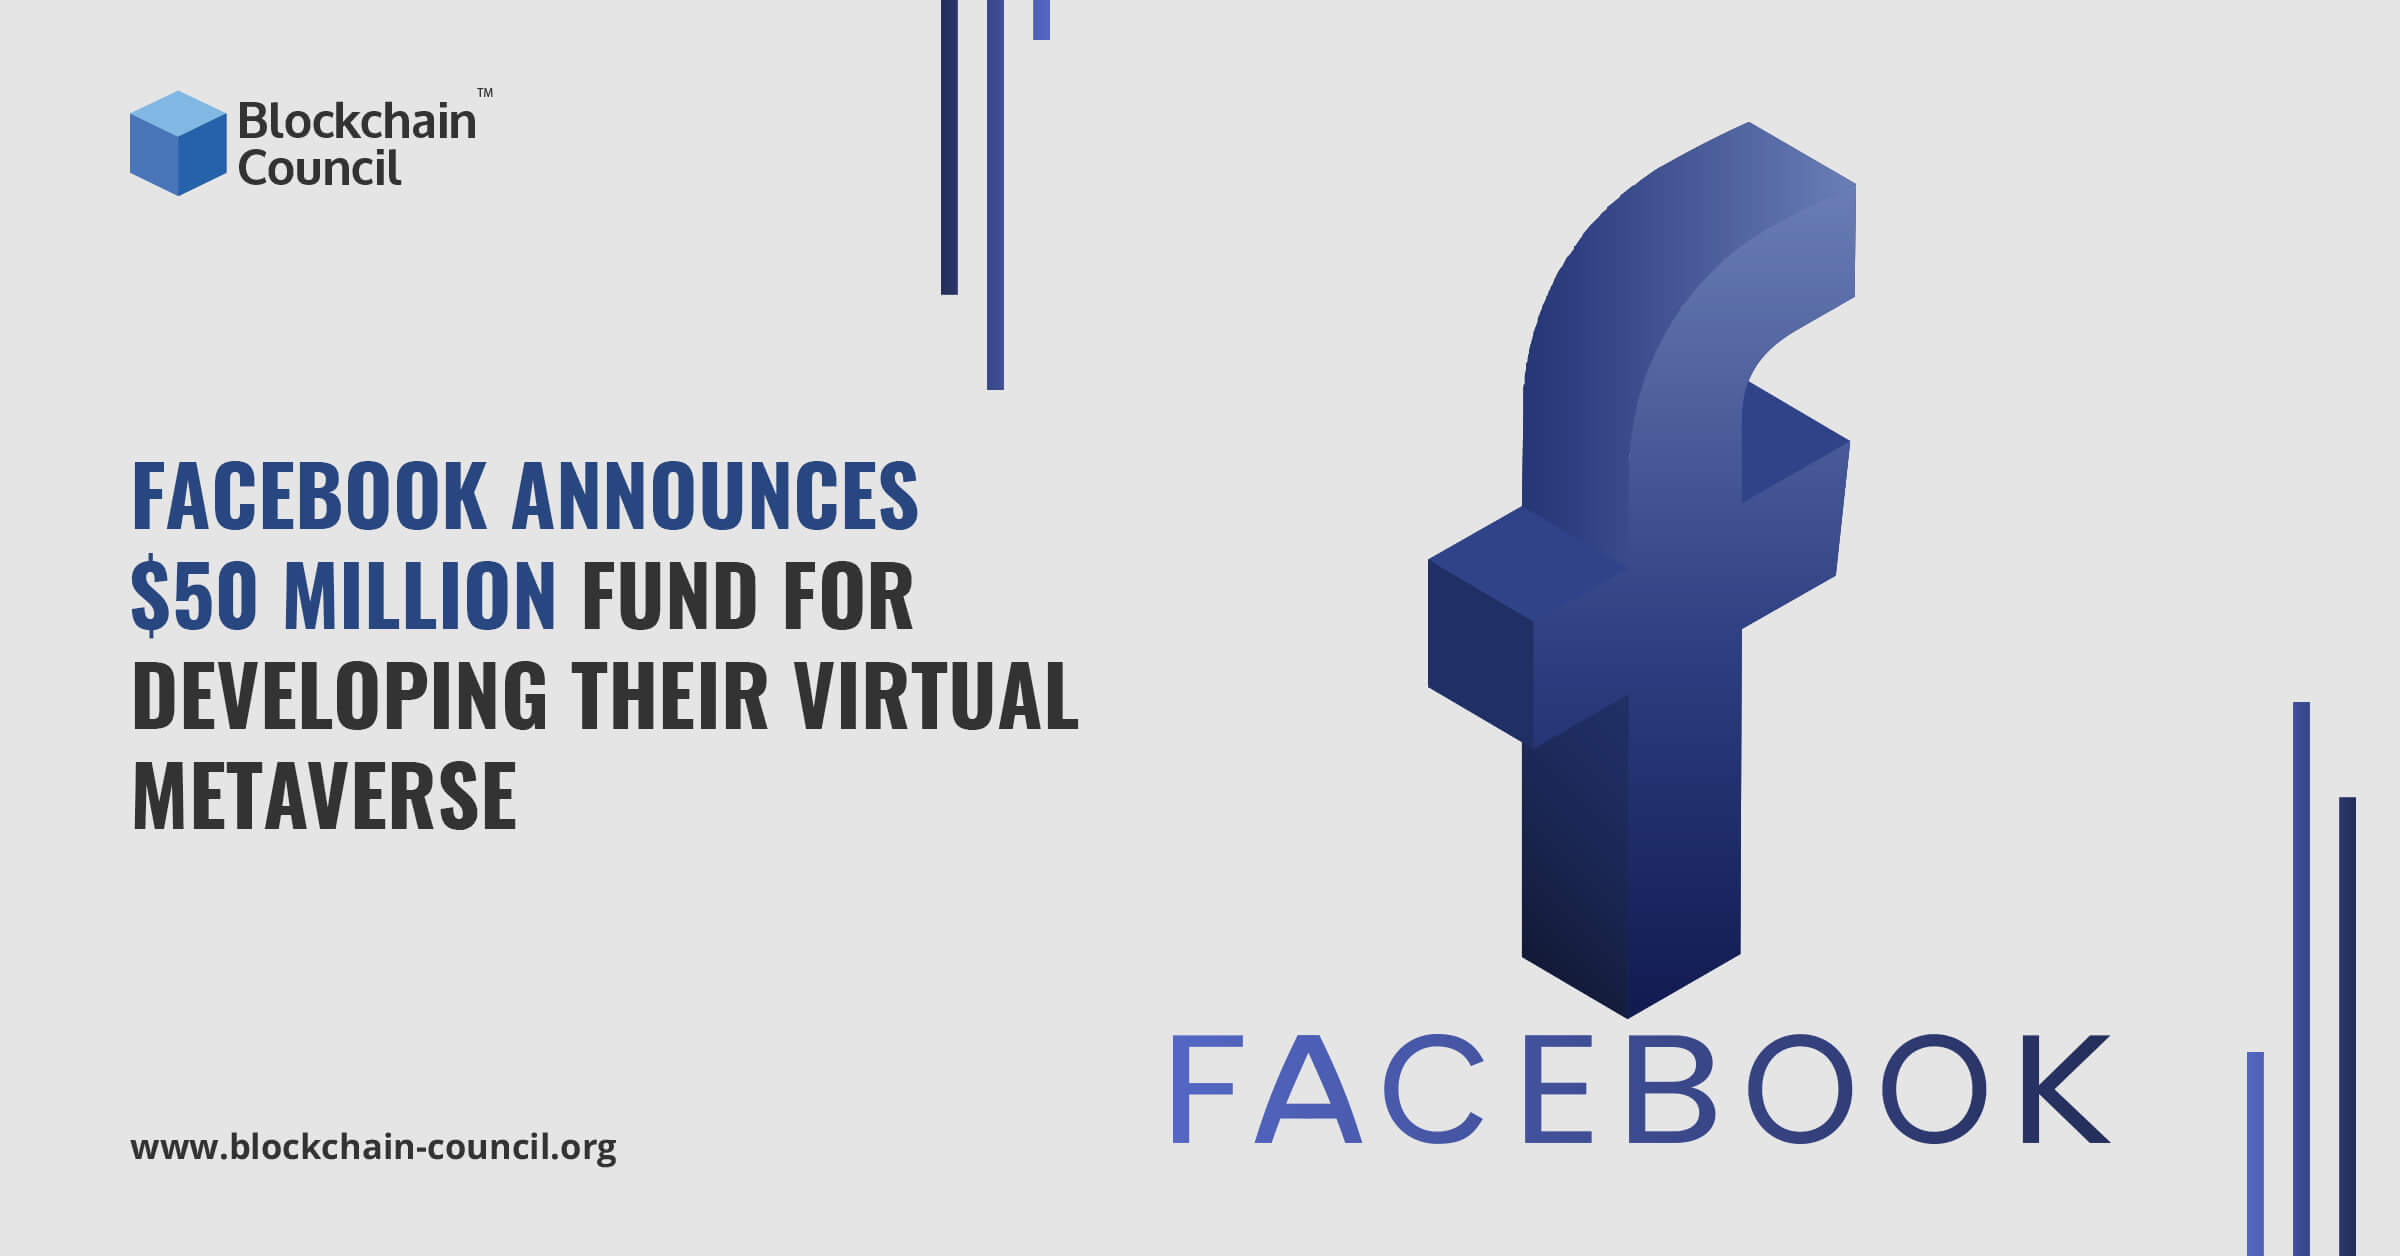 Facebook Announces $50 Million Fund For Developing Their Virtual Metaverse